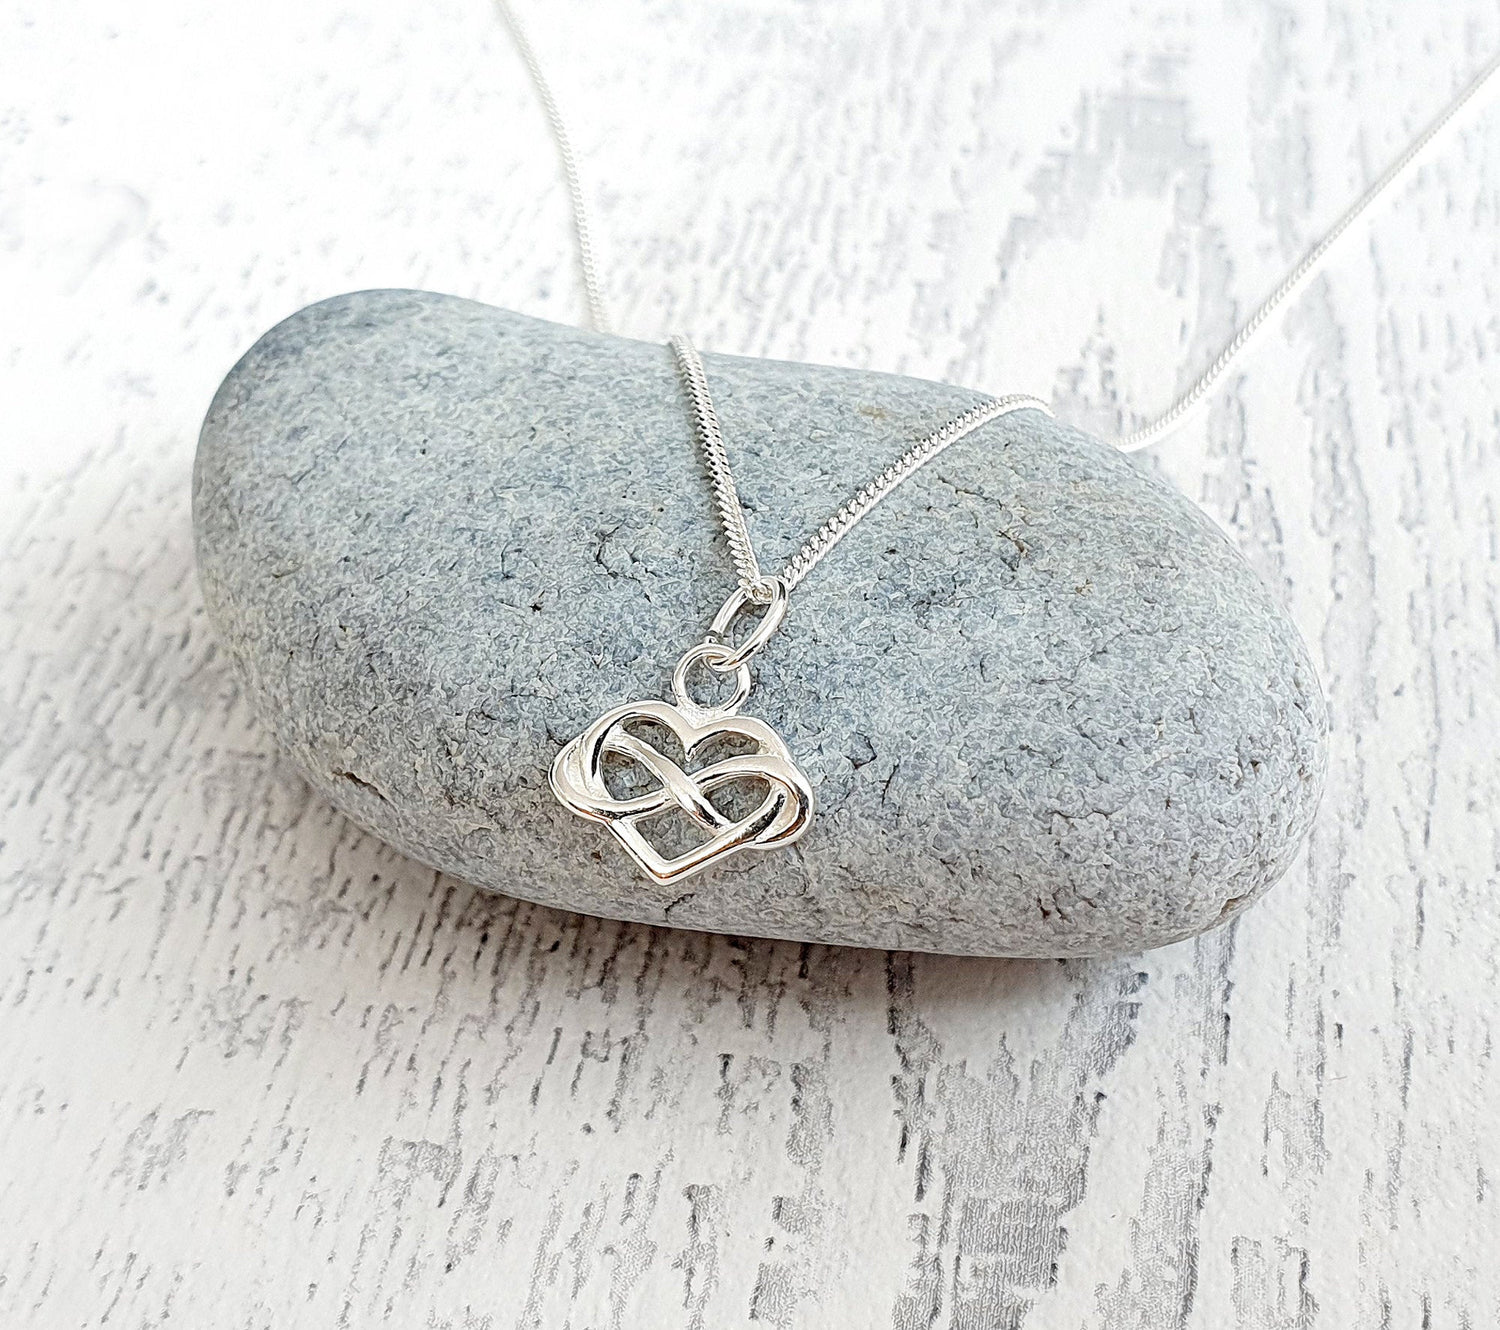 Infinity Heart 925 Sterling Silver Stud Earrings / Necklace / Gift Set - Includes a Personalised Gift Message